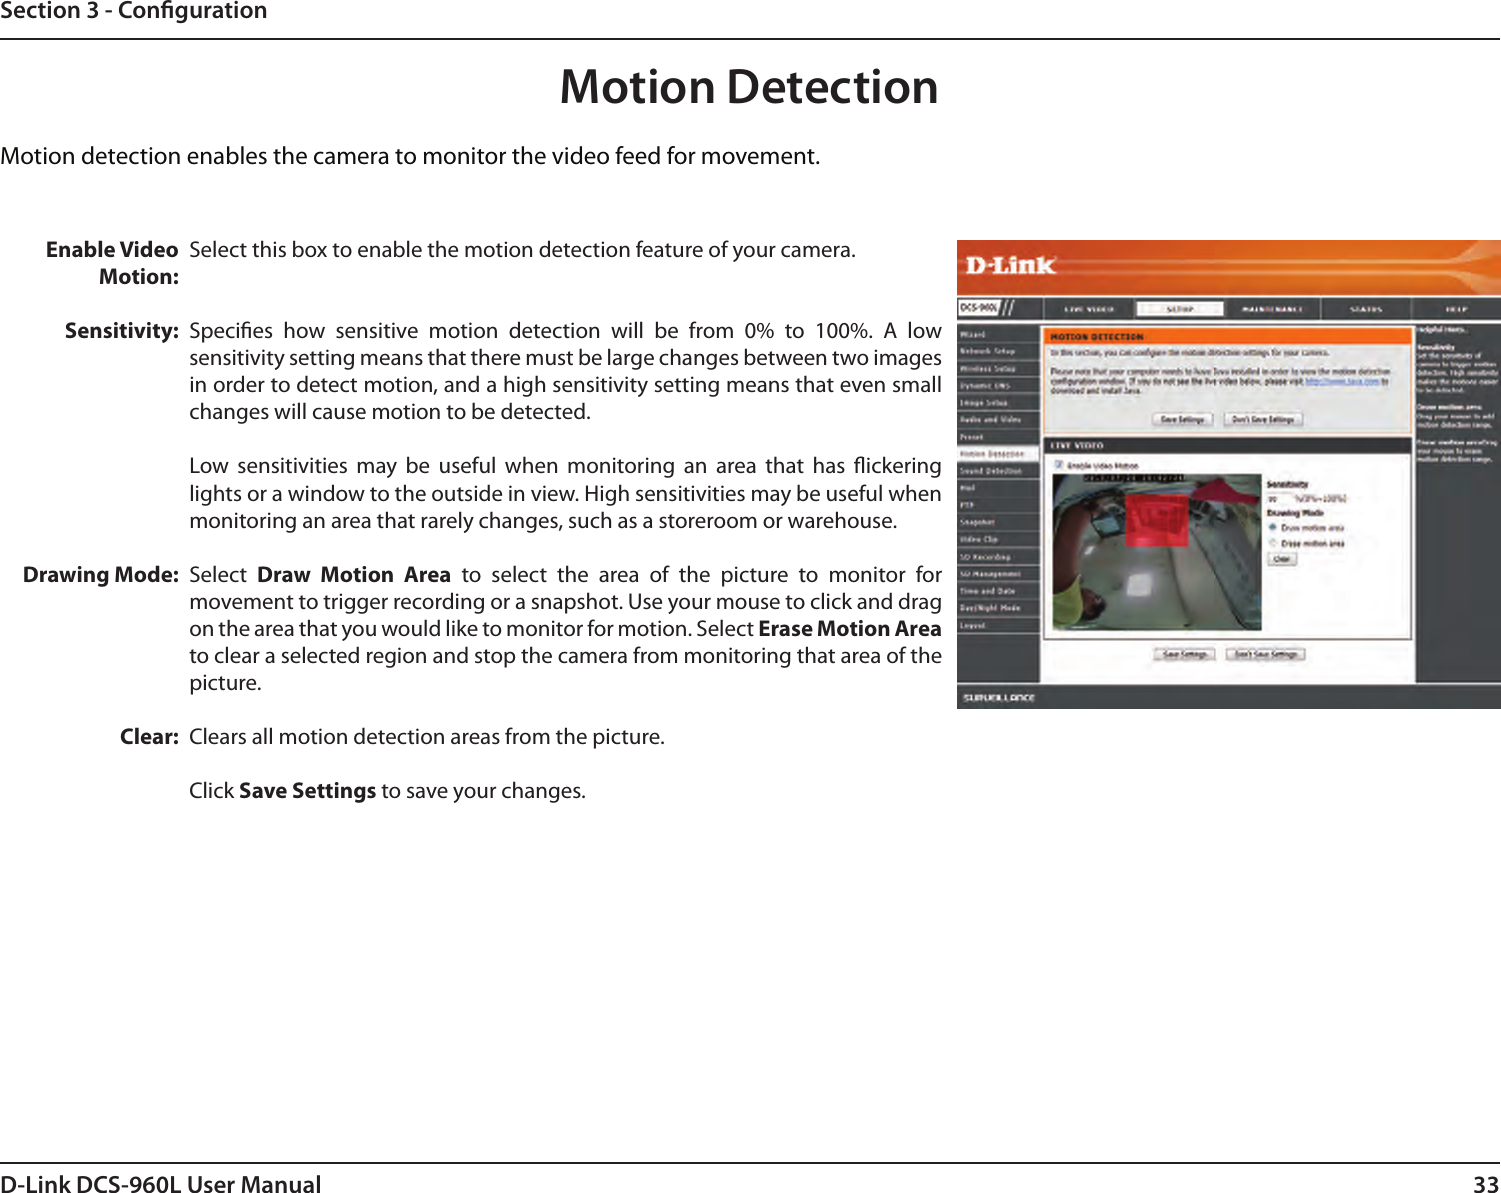 33D-Link DCS-960L User ManualSection 3 - CongurationMotion DetectionMotion detection enables the camera to monitor the video feed for movement. Enable Video Motion:Sensitivity:Drawing Mode:Clear:Select this box to enable the motion detection feature of your camera.Species  how  sensitive  motion  detection  will  be  from  0%  to  100%.  A  low sensitivity setting means that there must be large changes between two images in order to detect motion, and a high sensitivity setting means that even small changes will cause motion to be detected.Low  sensitivities  may  be  useful  when  monitoring  an  area  that  has  ickering lights or a window to the outside in view. High sensitivities may be useful when monitoring an area that rarely changes, such as a storeroom or warehouse.Select  Draw  Motion  Area  to  select  the  area  of  the  picture  to  monitor  for movement to trigger recording or a snapshot. Use your mouse to click and drag on the area that you would like to monitor for motion. Select Erase Motion Area to clear a selected region and stop the camera from monitoring that area of the picture.Clears all motion detection areas from the picture.Click Save Settings to save your changes.